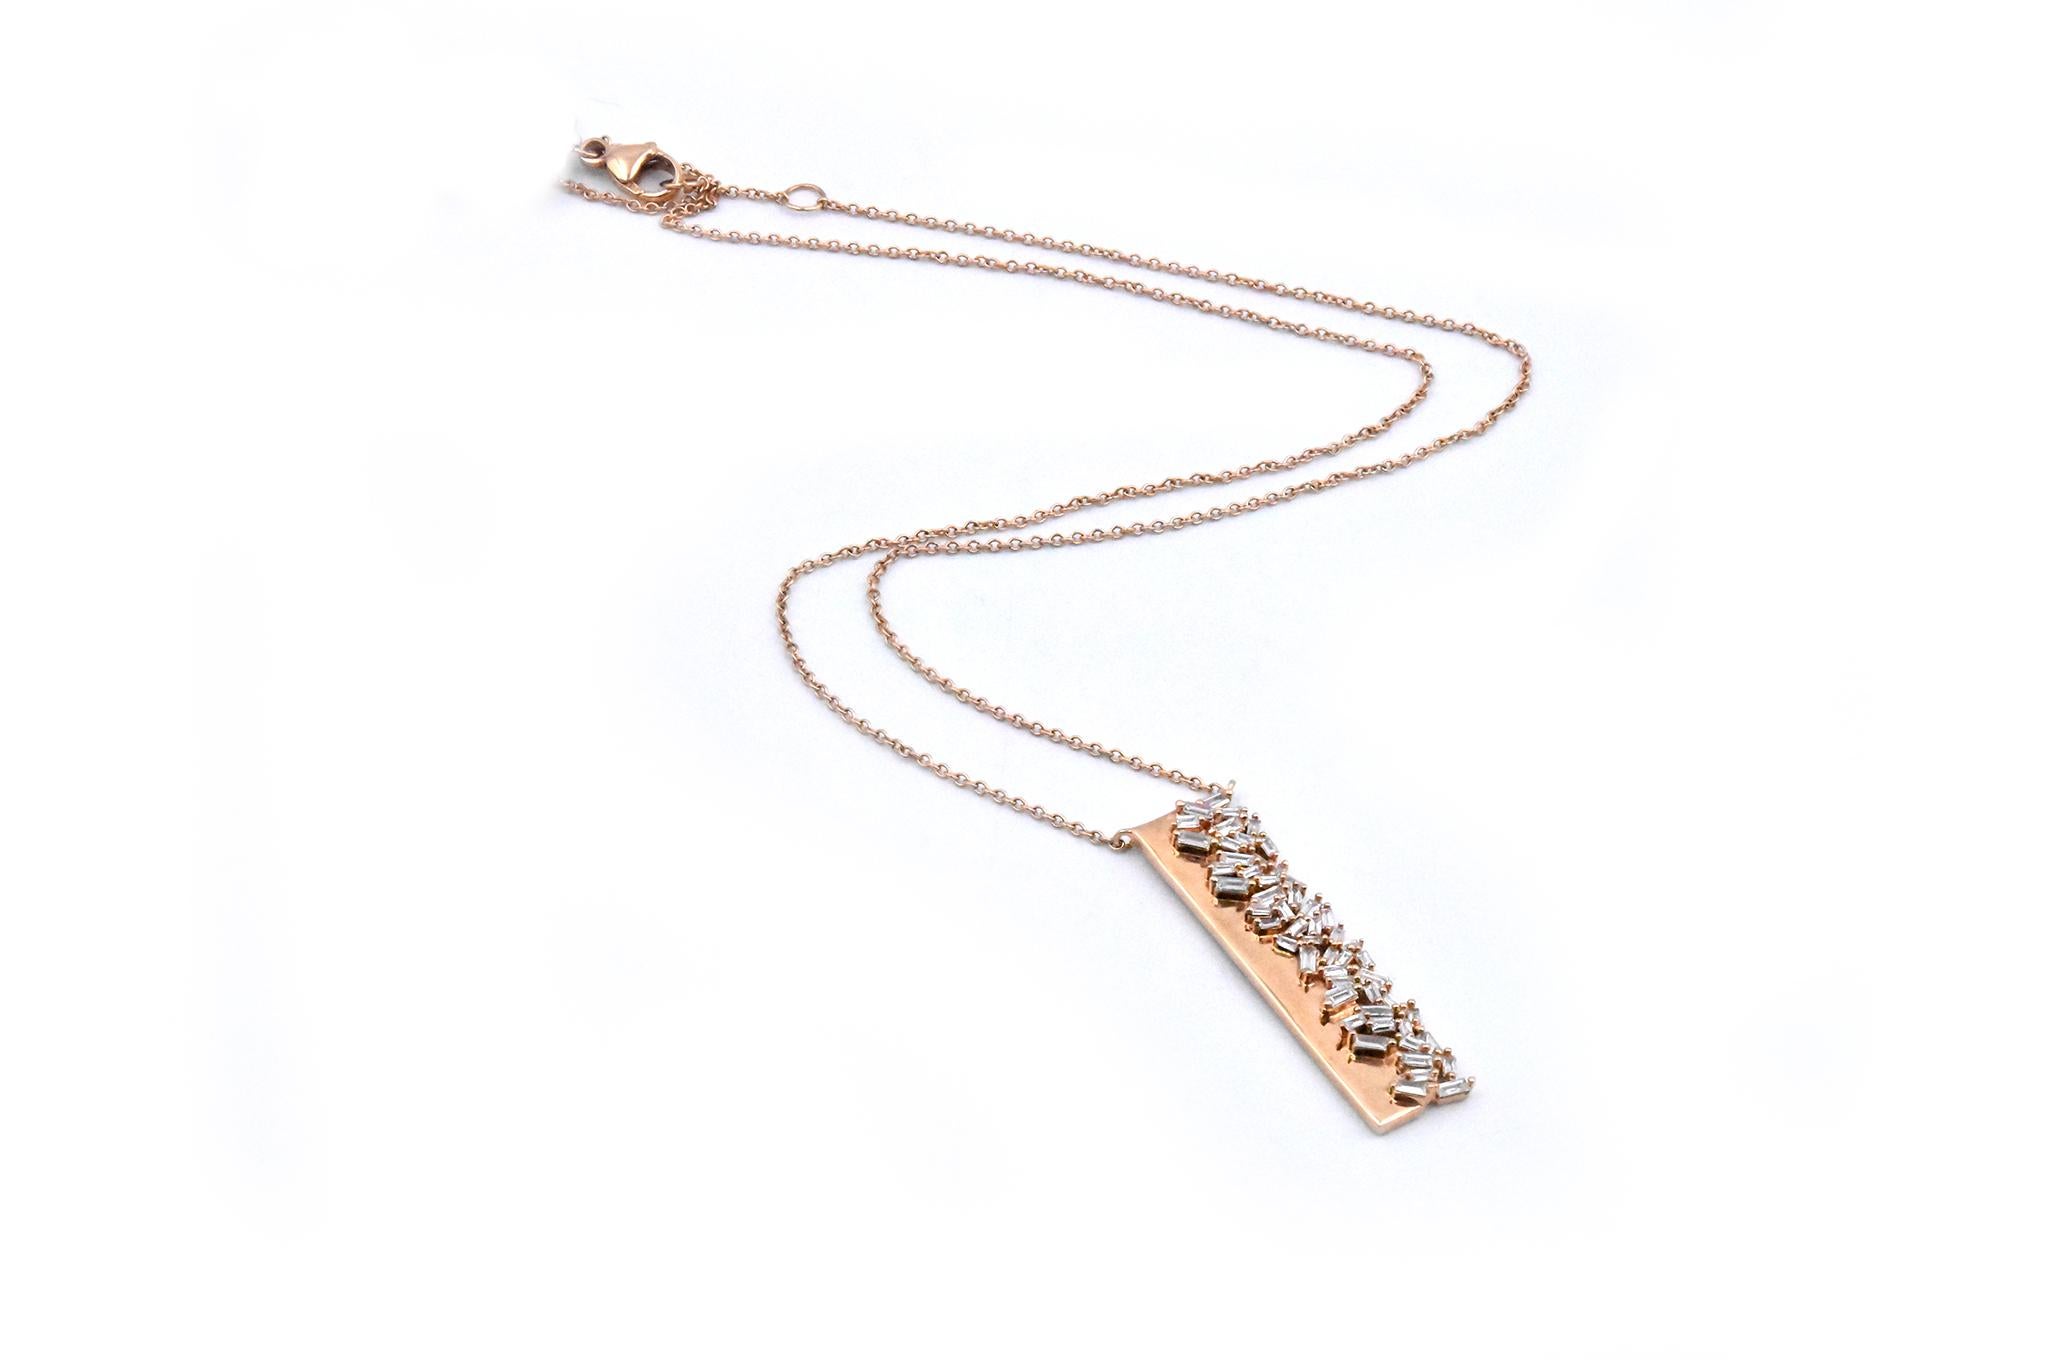 Designer: Custom
Material: 14K rose gold
Diamonds: 53 baguette cut = .56cttw
Color: G
Clarity: VS
Dimensions: necklace measures 18-inches in length with adjusters
Weight: 4.81 grams
